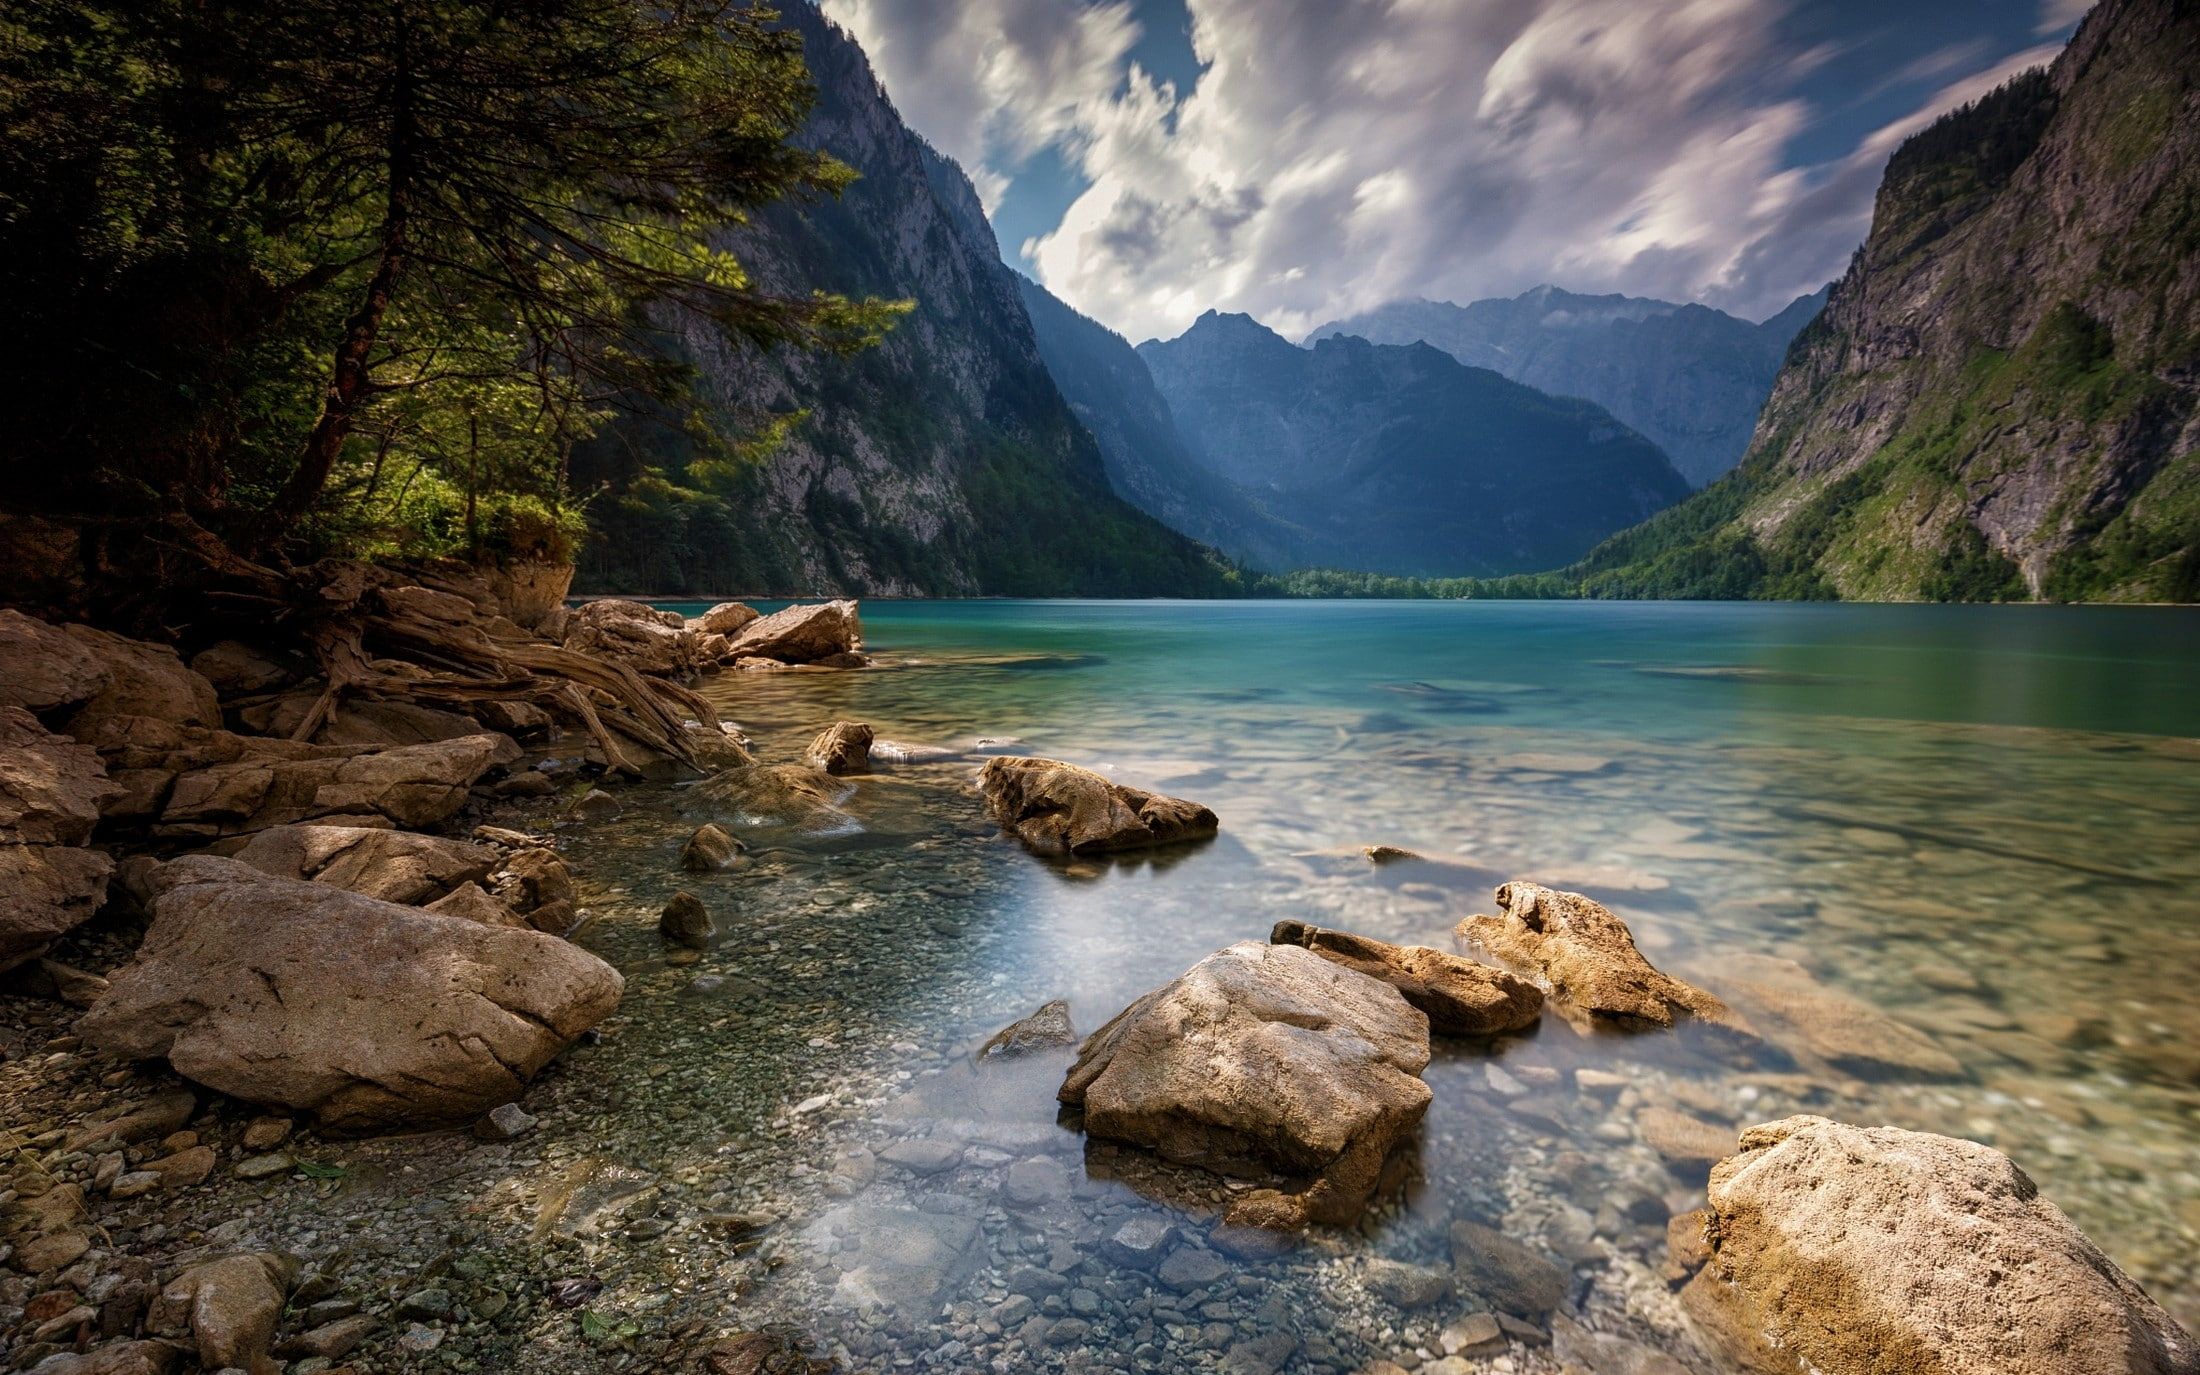 Nature, Landscape, Alps, Summer, Lake, Mountain, Trees, Water